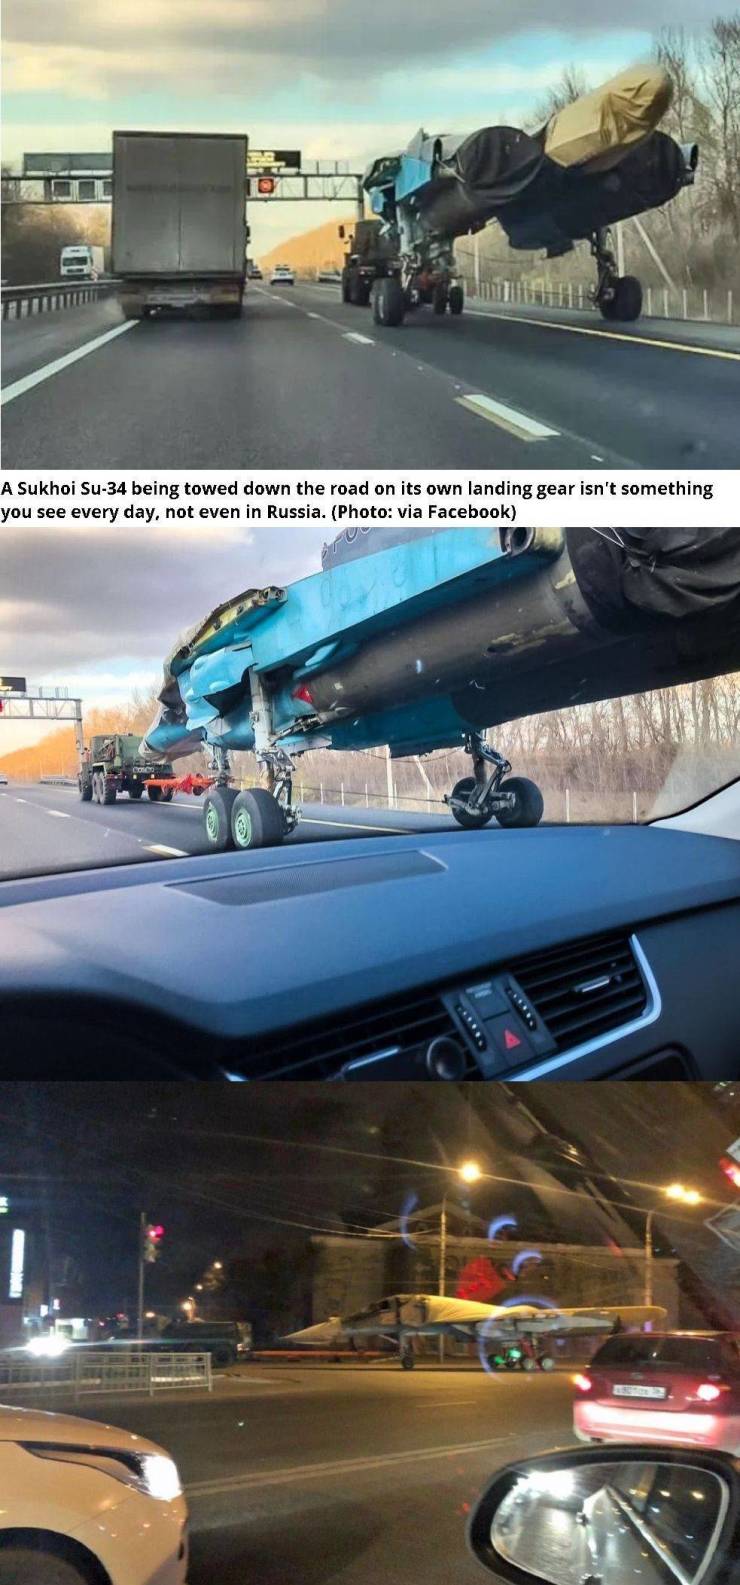 airline - O E A Sukhoi Su34 being towed down the road on its own landing gear isn't something you see every day, not even in Russia. Photo via Facebook